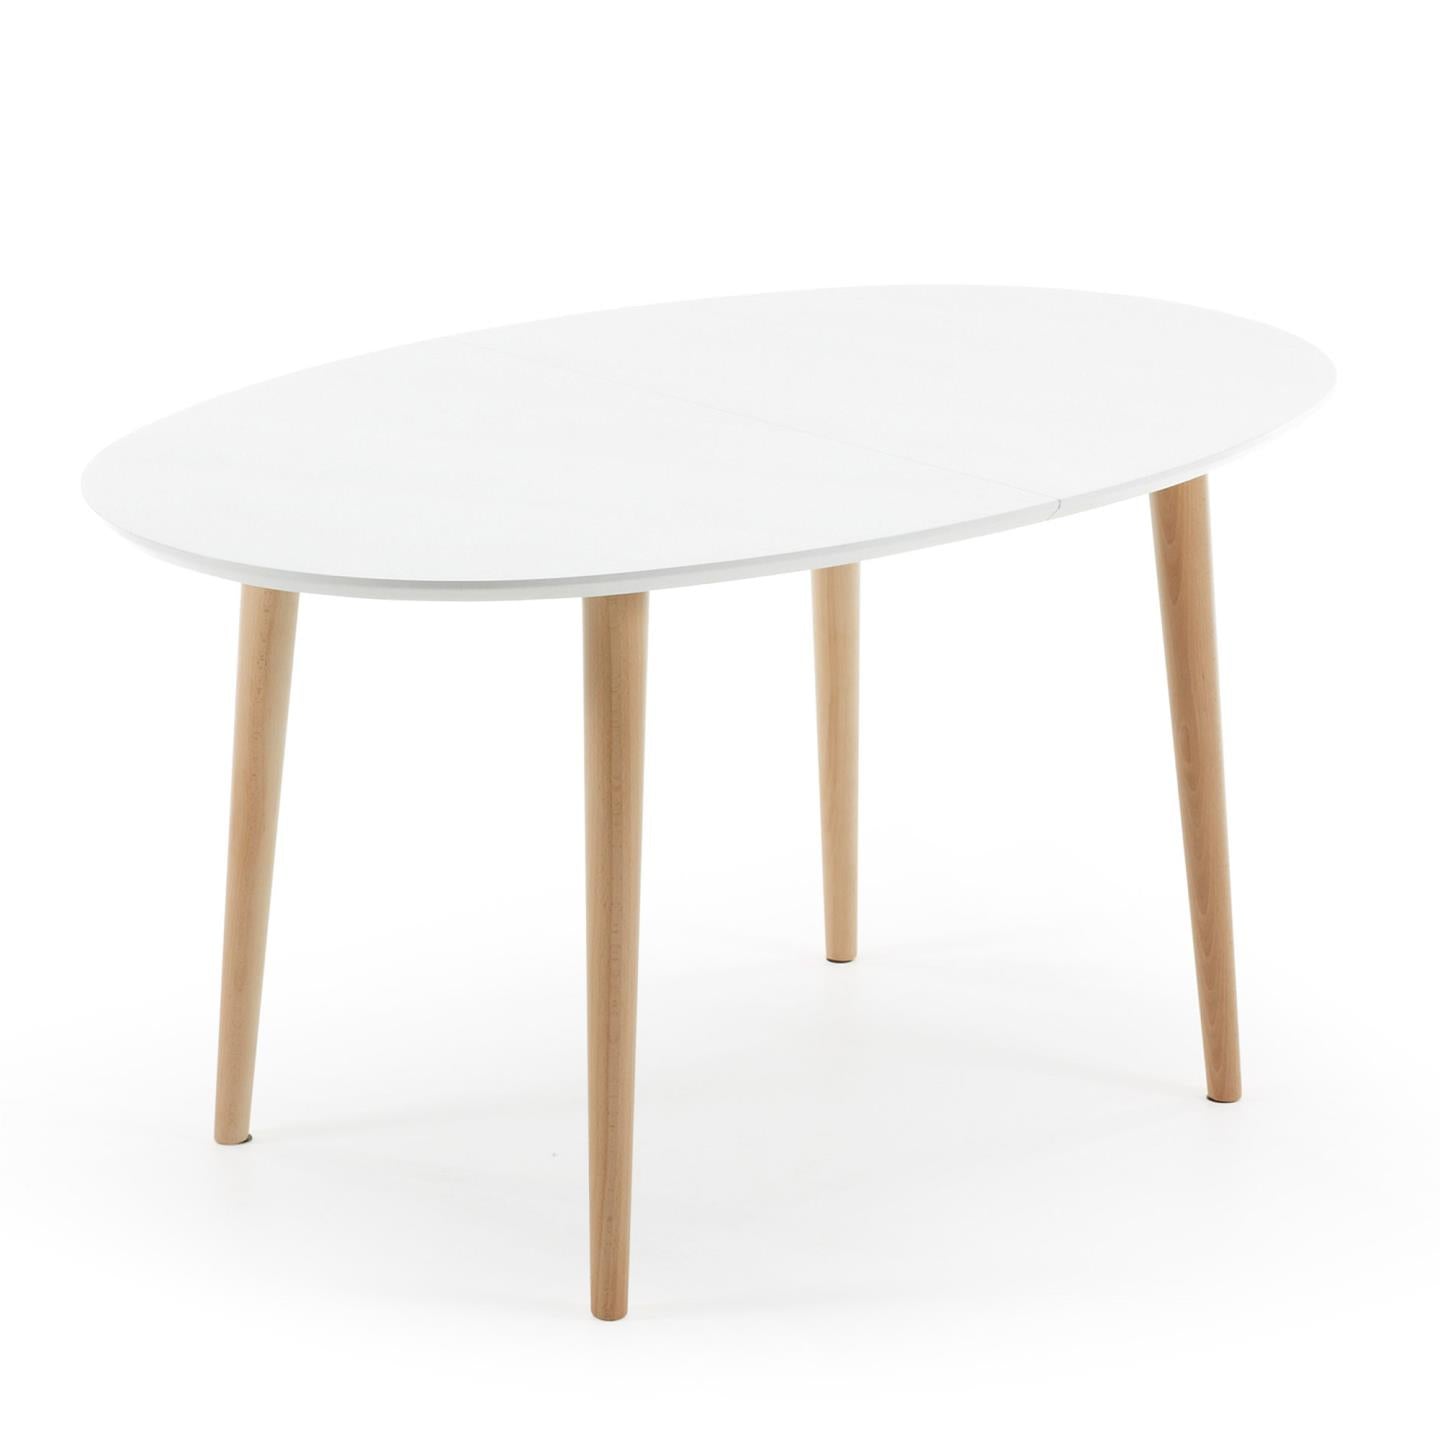 Oqui oval extendable MDF table with white lacquer and solid beech legs 140(220)x90 cm